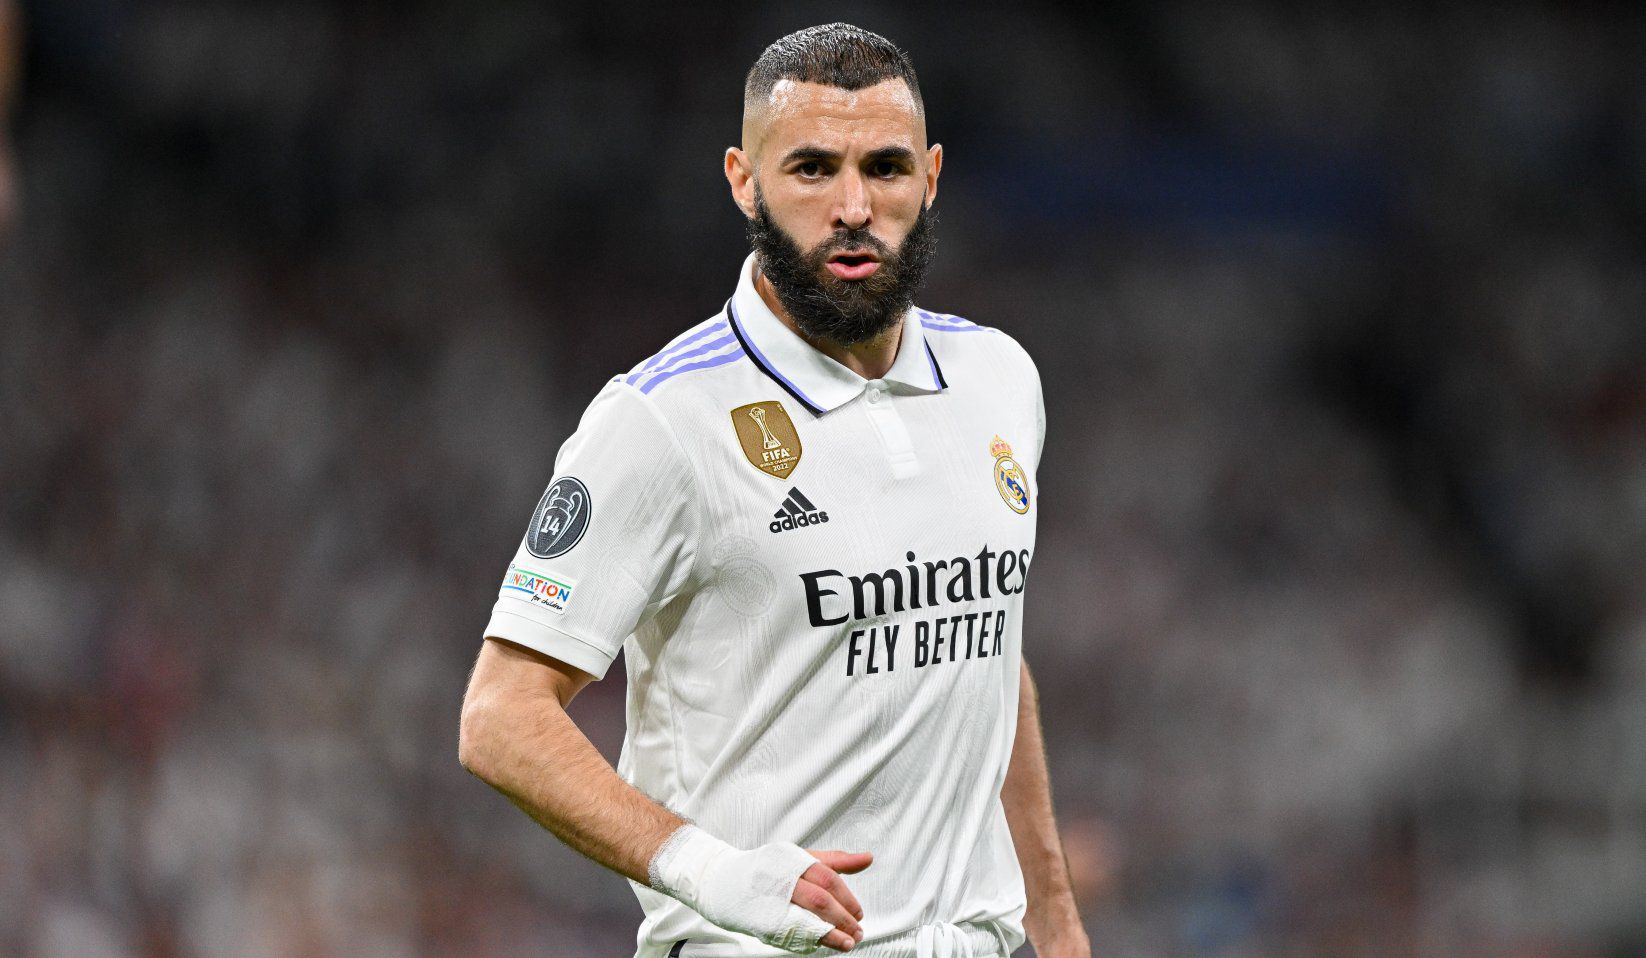 Karim Benzema will leave Real Madrid after 14 years at the Spanish club, World News